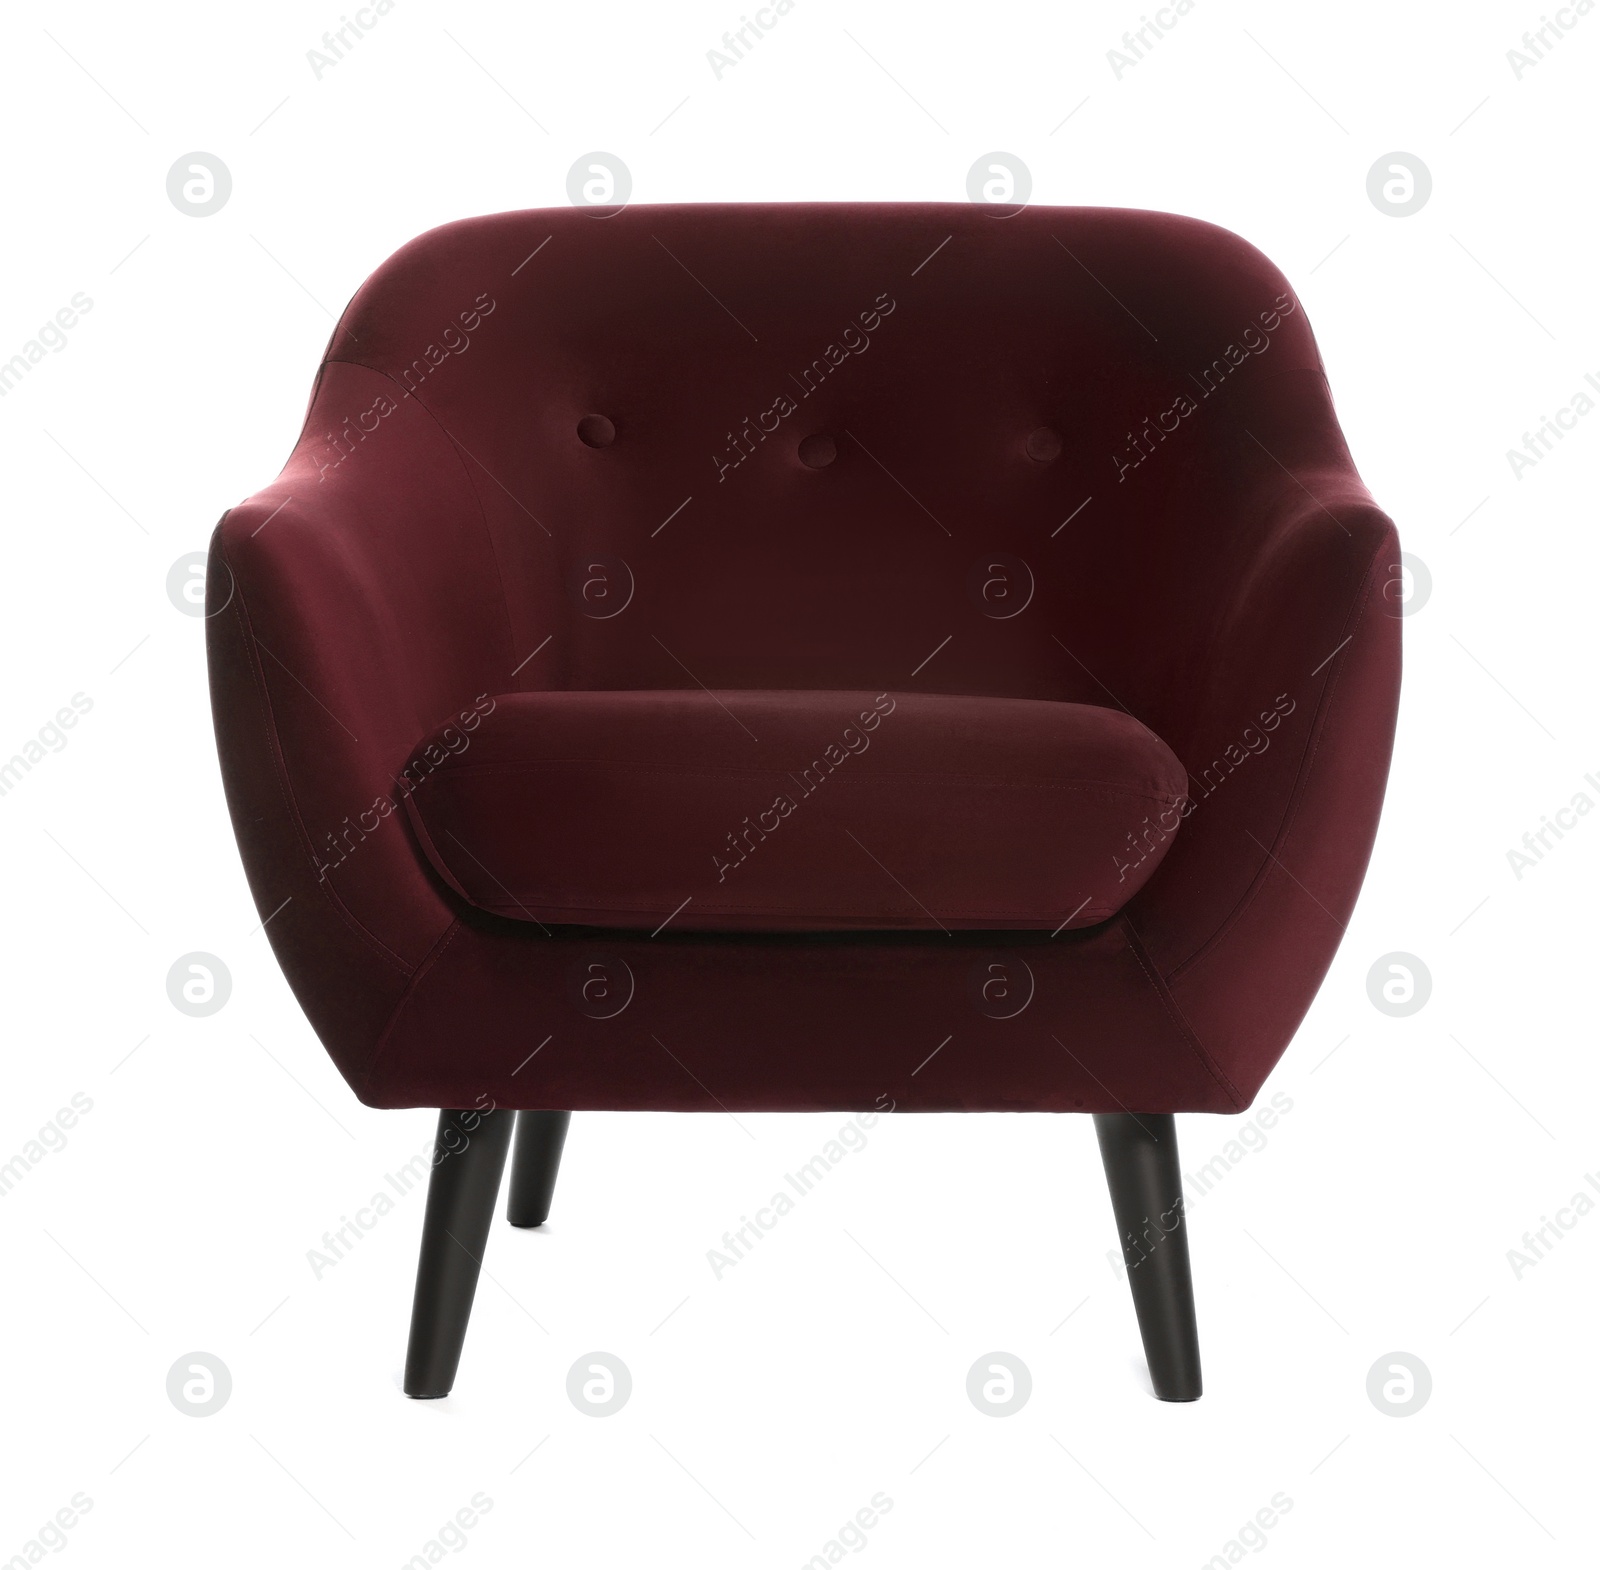 Image of One comfortable burgundy armchair isolated on white